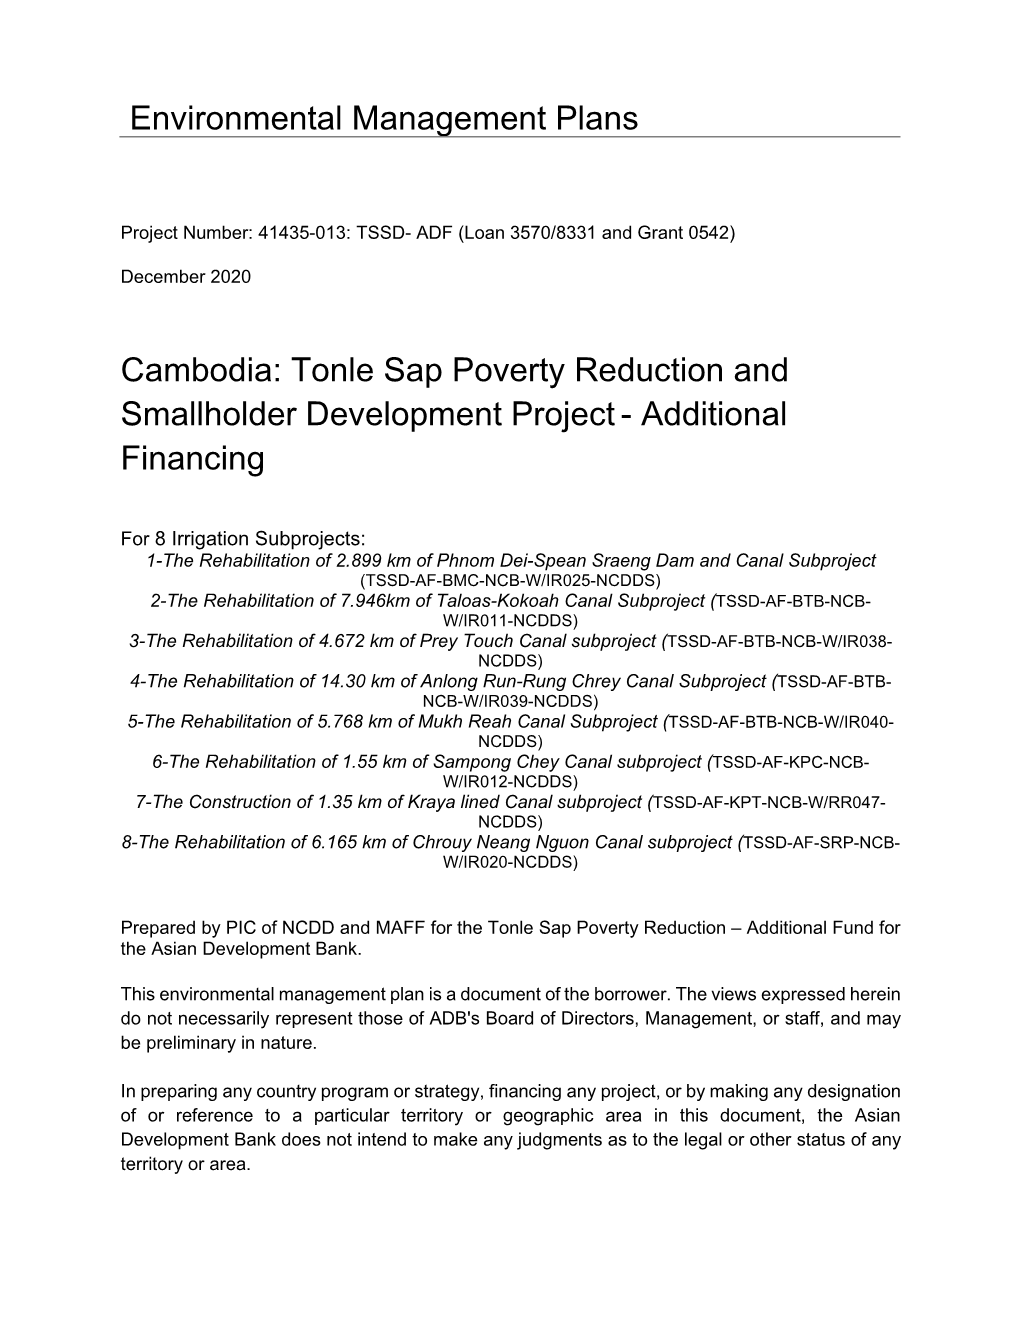 Tonle Sap Poverty Reduction and Smallholder Development Project - Additional Financing